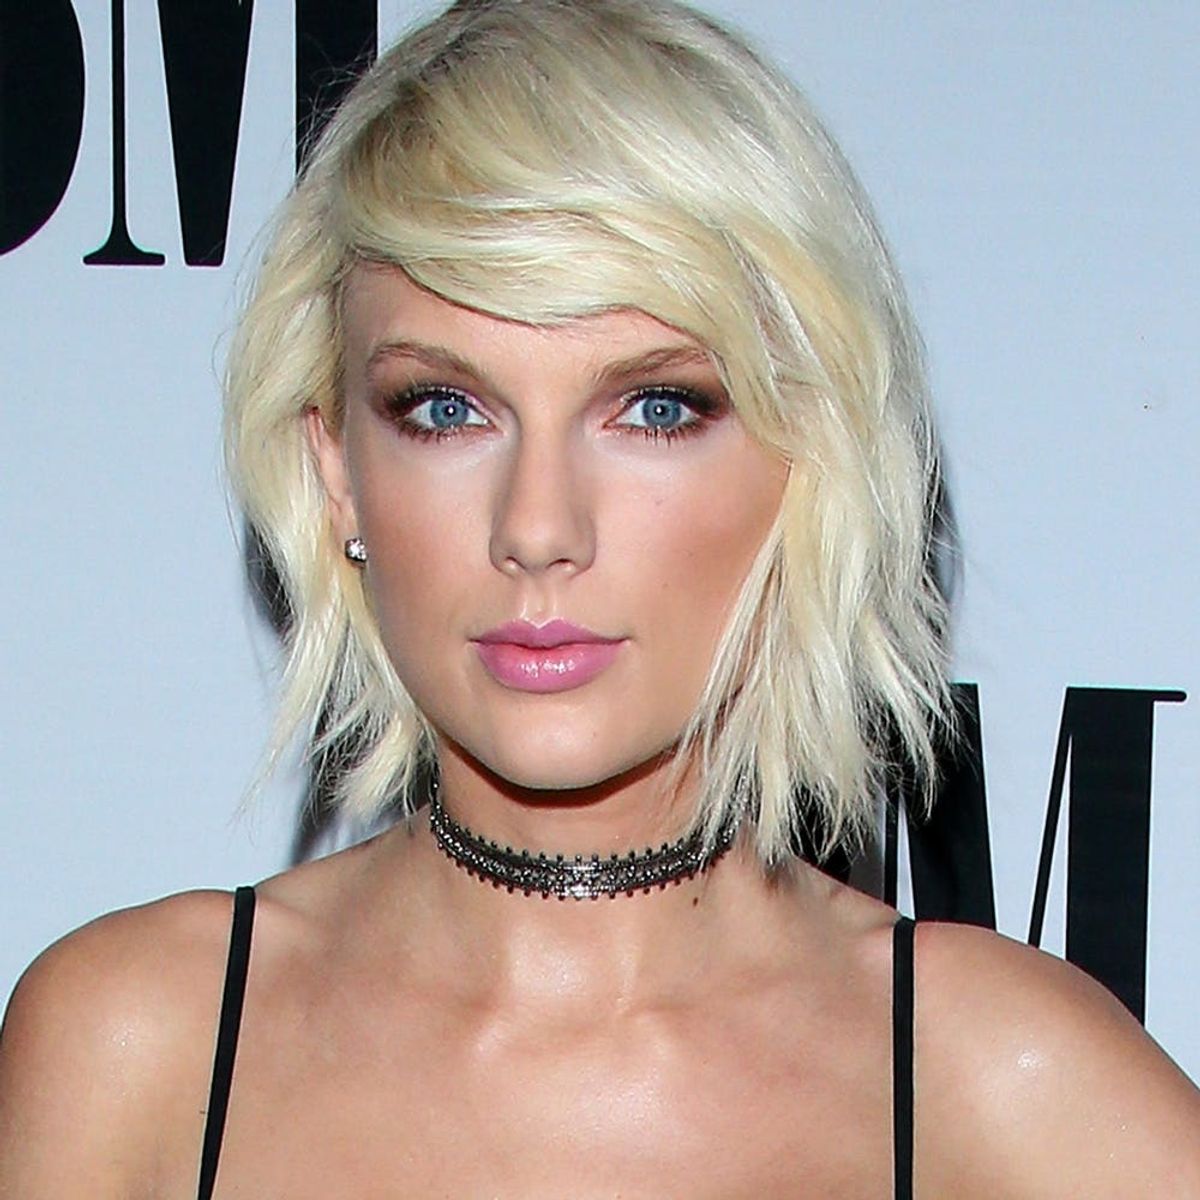 Taylor Swift Is Starting Her New Relationship With a Brand New Hair Color